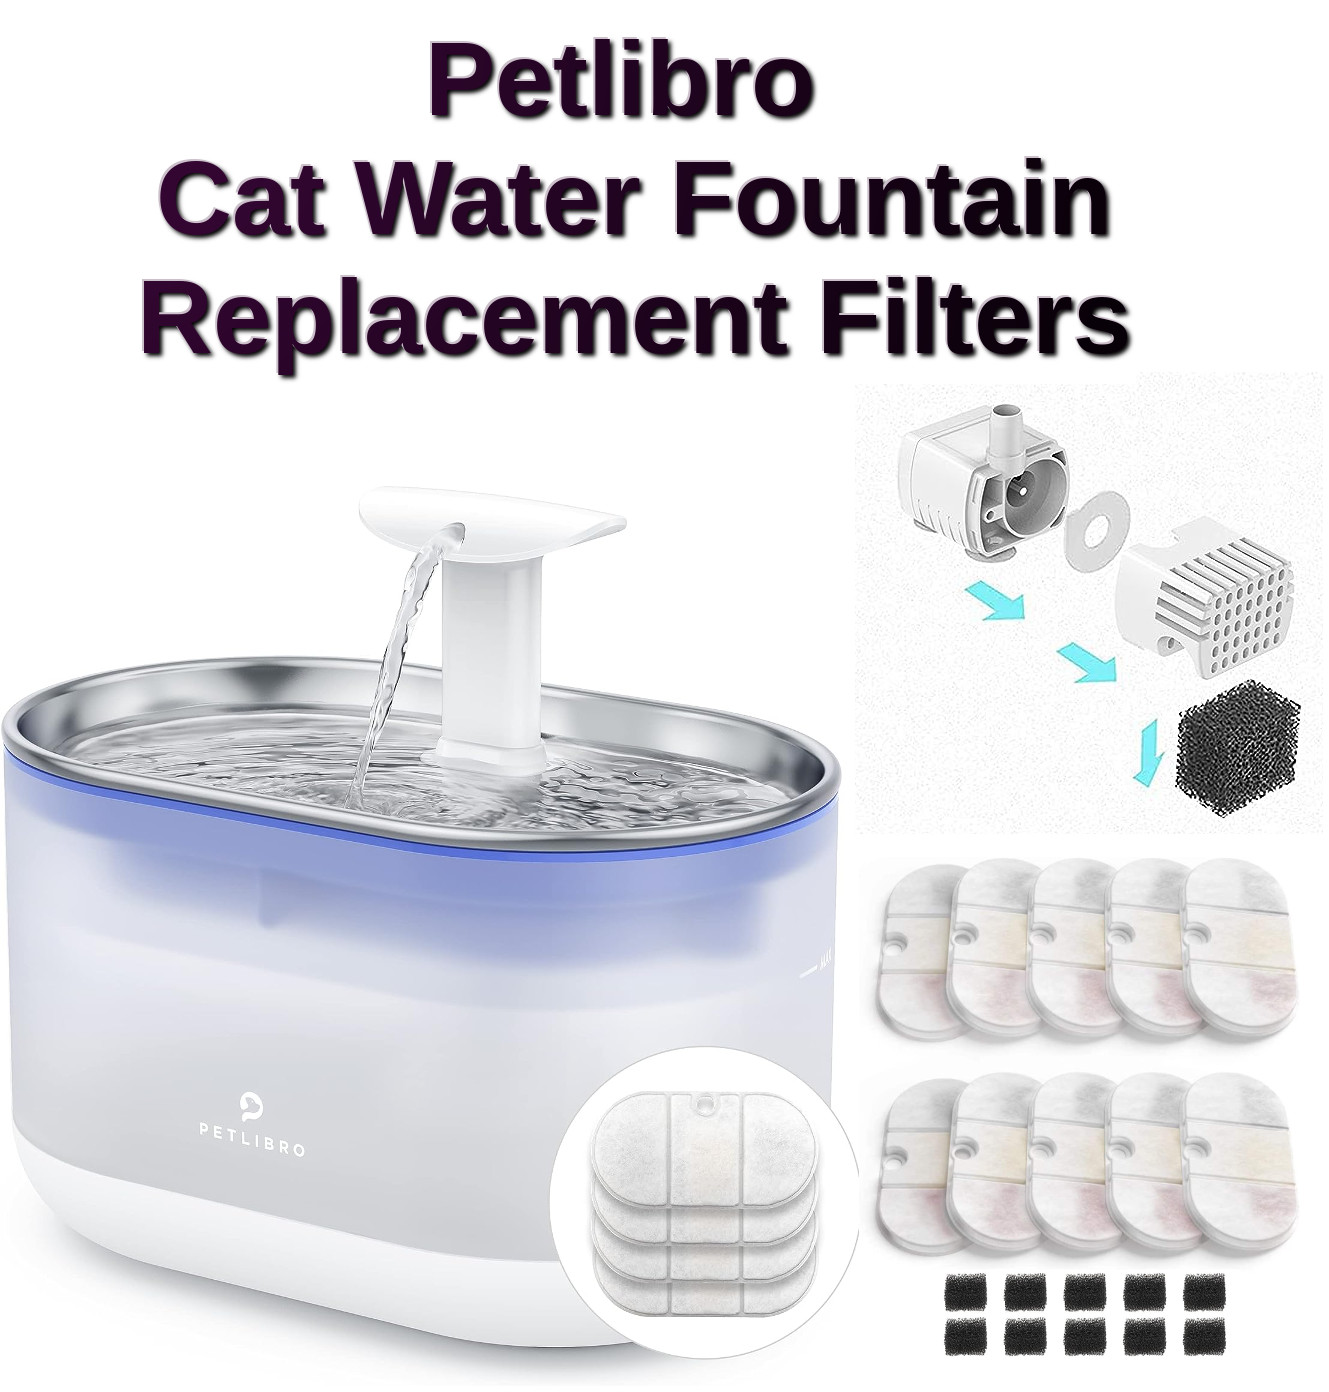 petlibro cat water fountain replacement filters